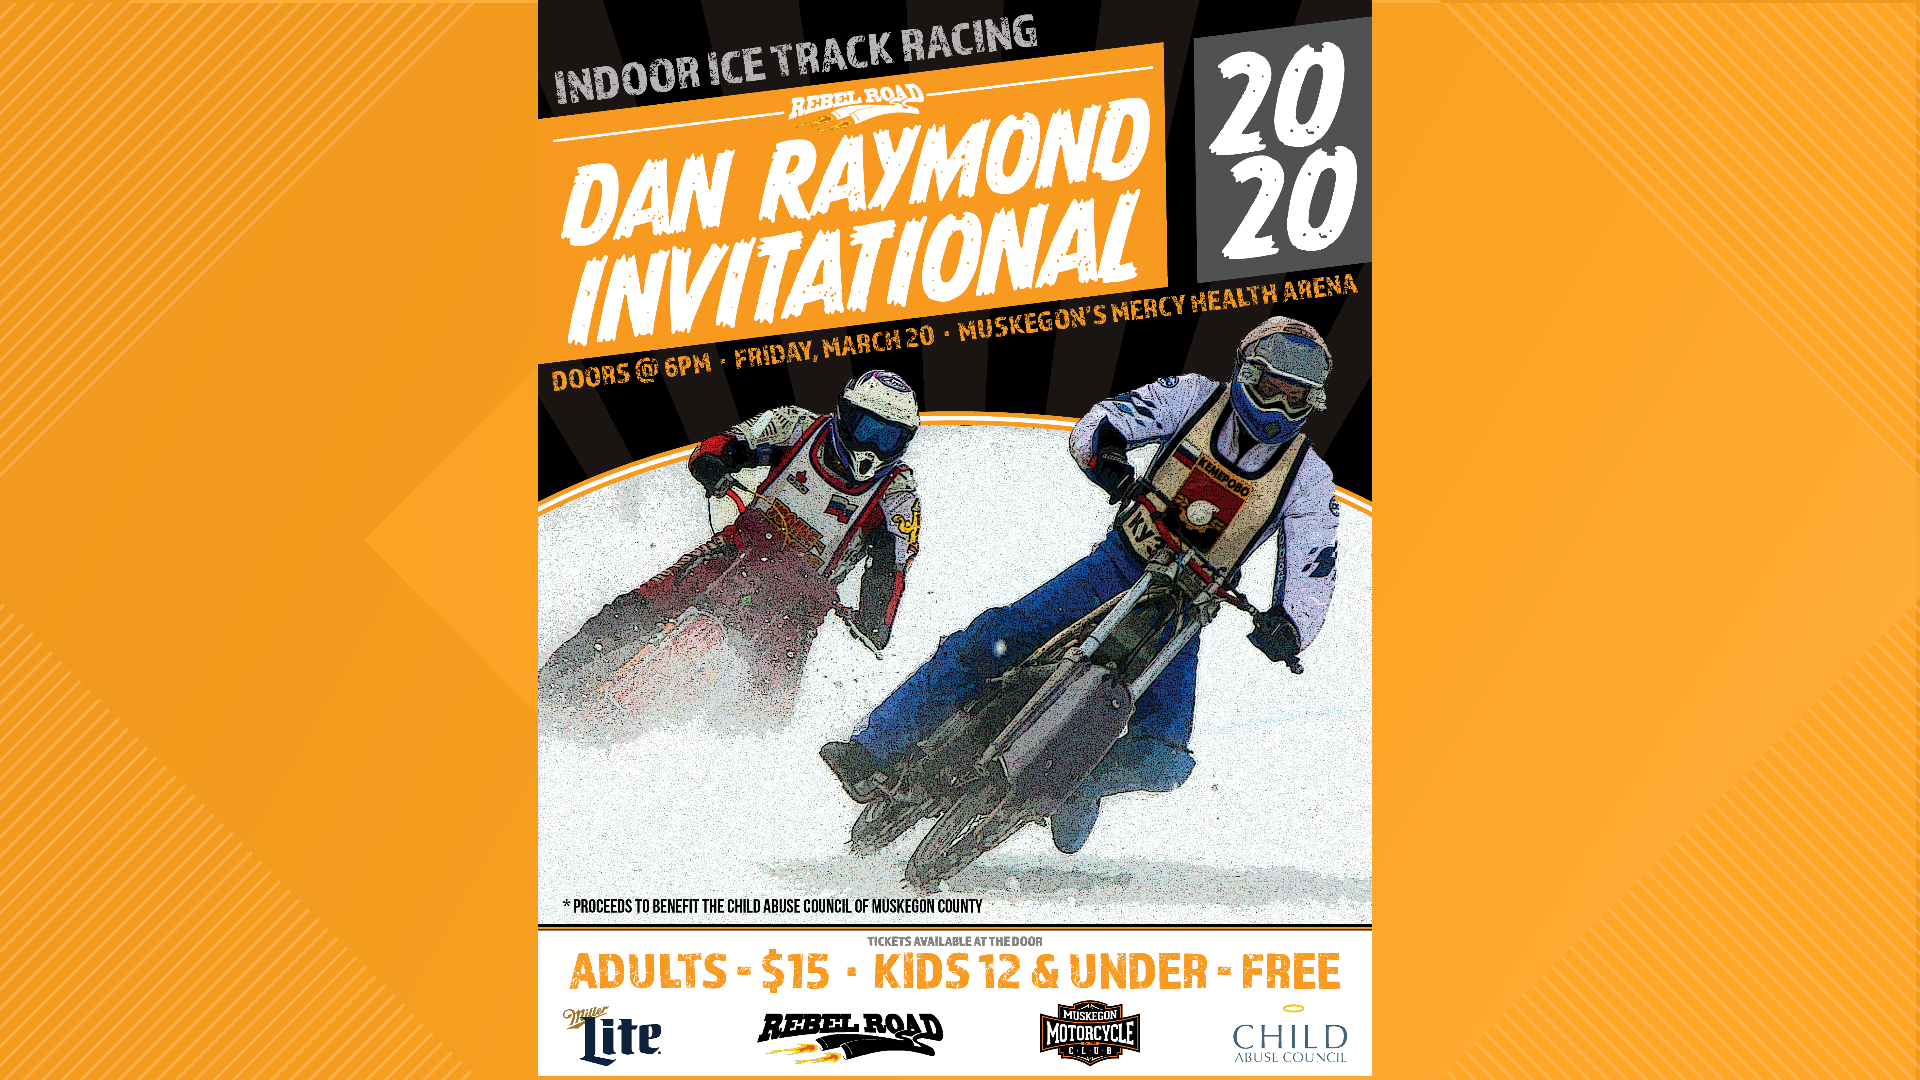 The Dan Raymond Invitational will be held on Friday, March 20.